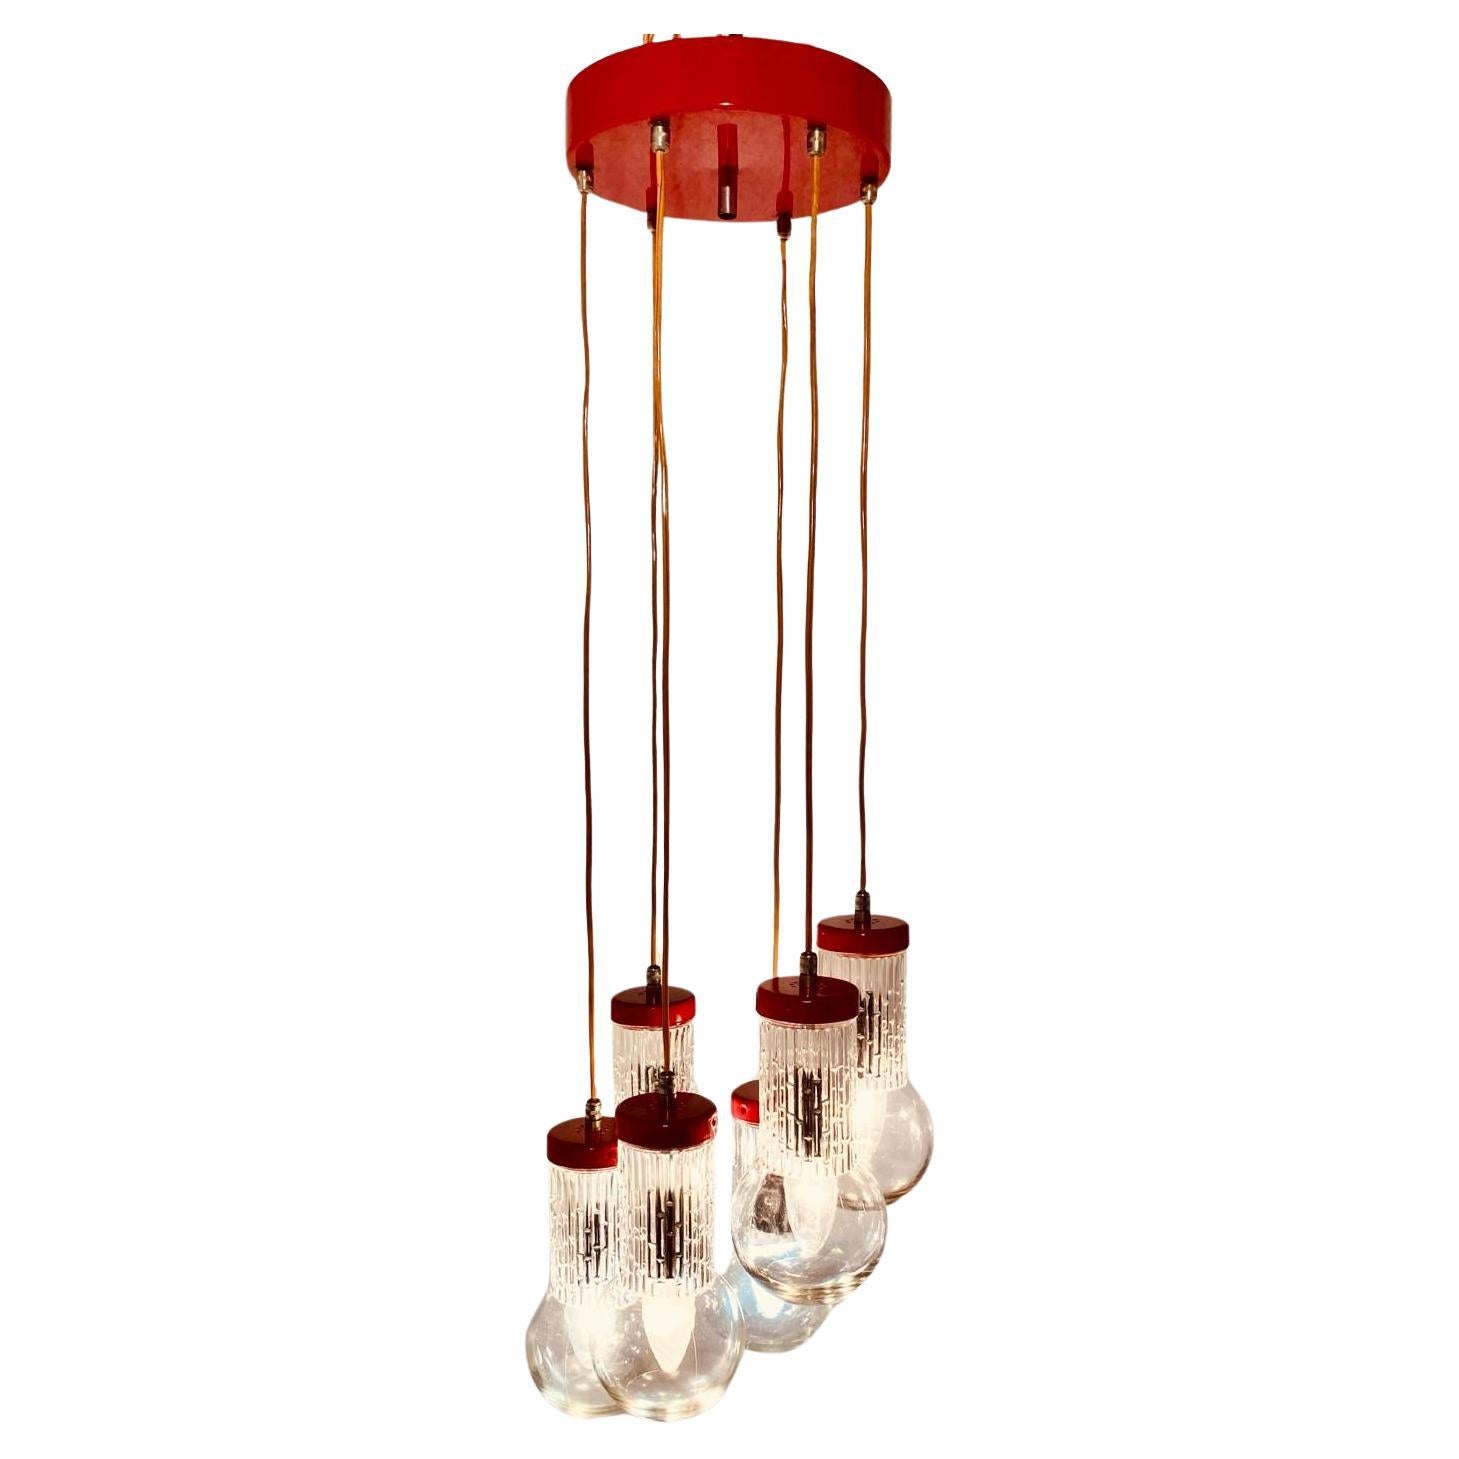 Vintage red five-light spot chandelier, in the style of Stilnovo Italy 1950s. The chandelier consists of five suspended lights with cut glass globes connected to the top plate by the wires of the lights. The chandelier has been completely restored